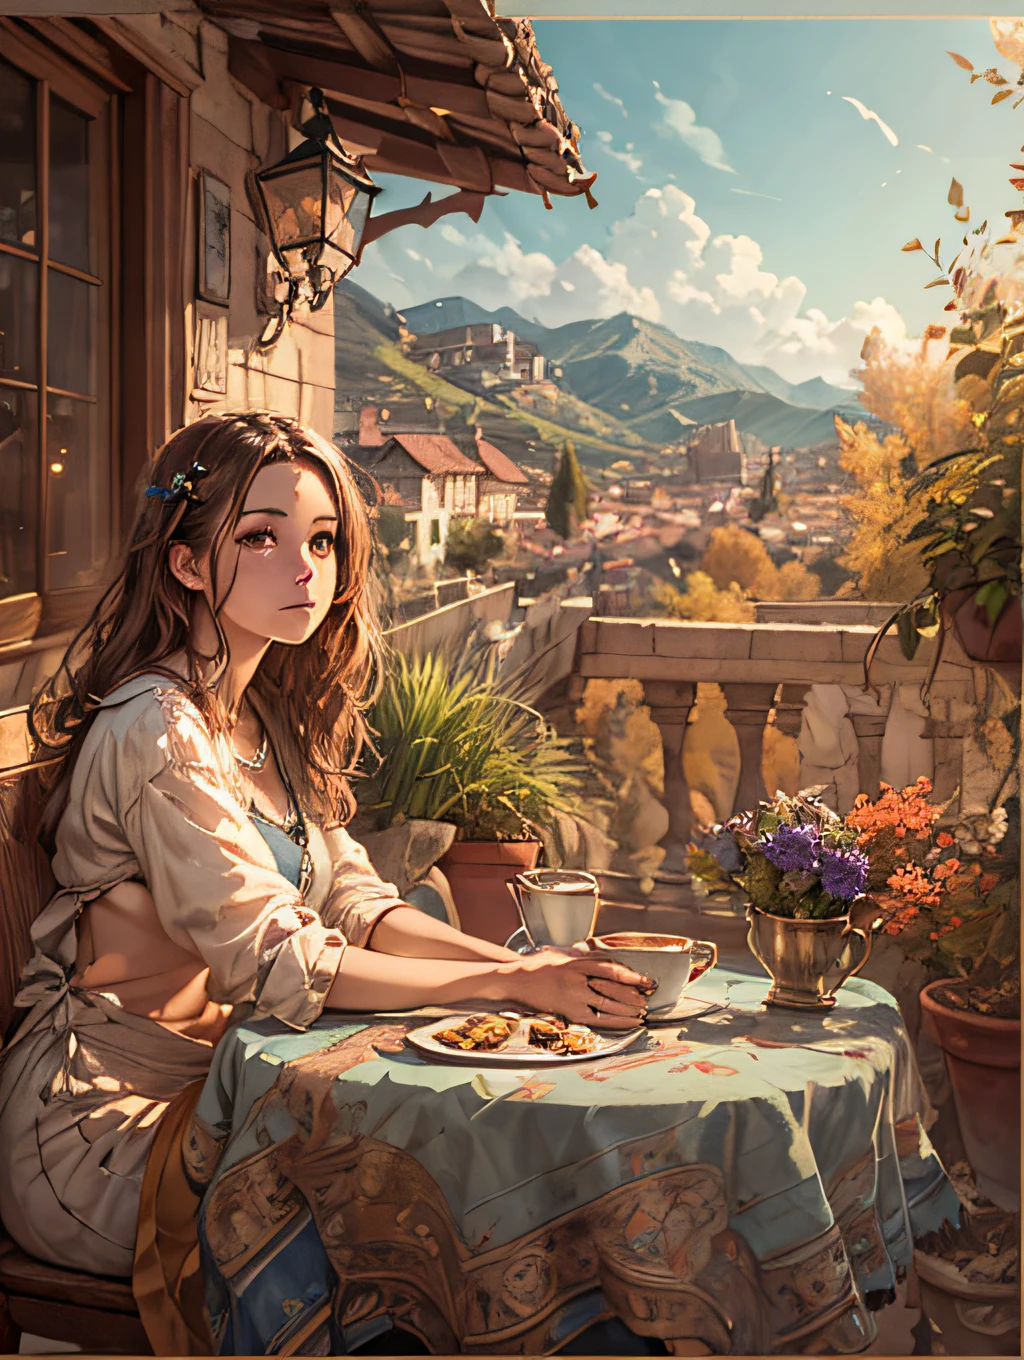 "(Masterpiece), (highest quality), intricately detailed portrait of a young woman sitting behind a table on a terrace, with her hands resting on the table. She has brown hair, a radiant expression, and the artwork is rendered in stunning 8K resolution. The background depicts a picturesque valley basking in sunlight."